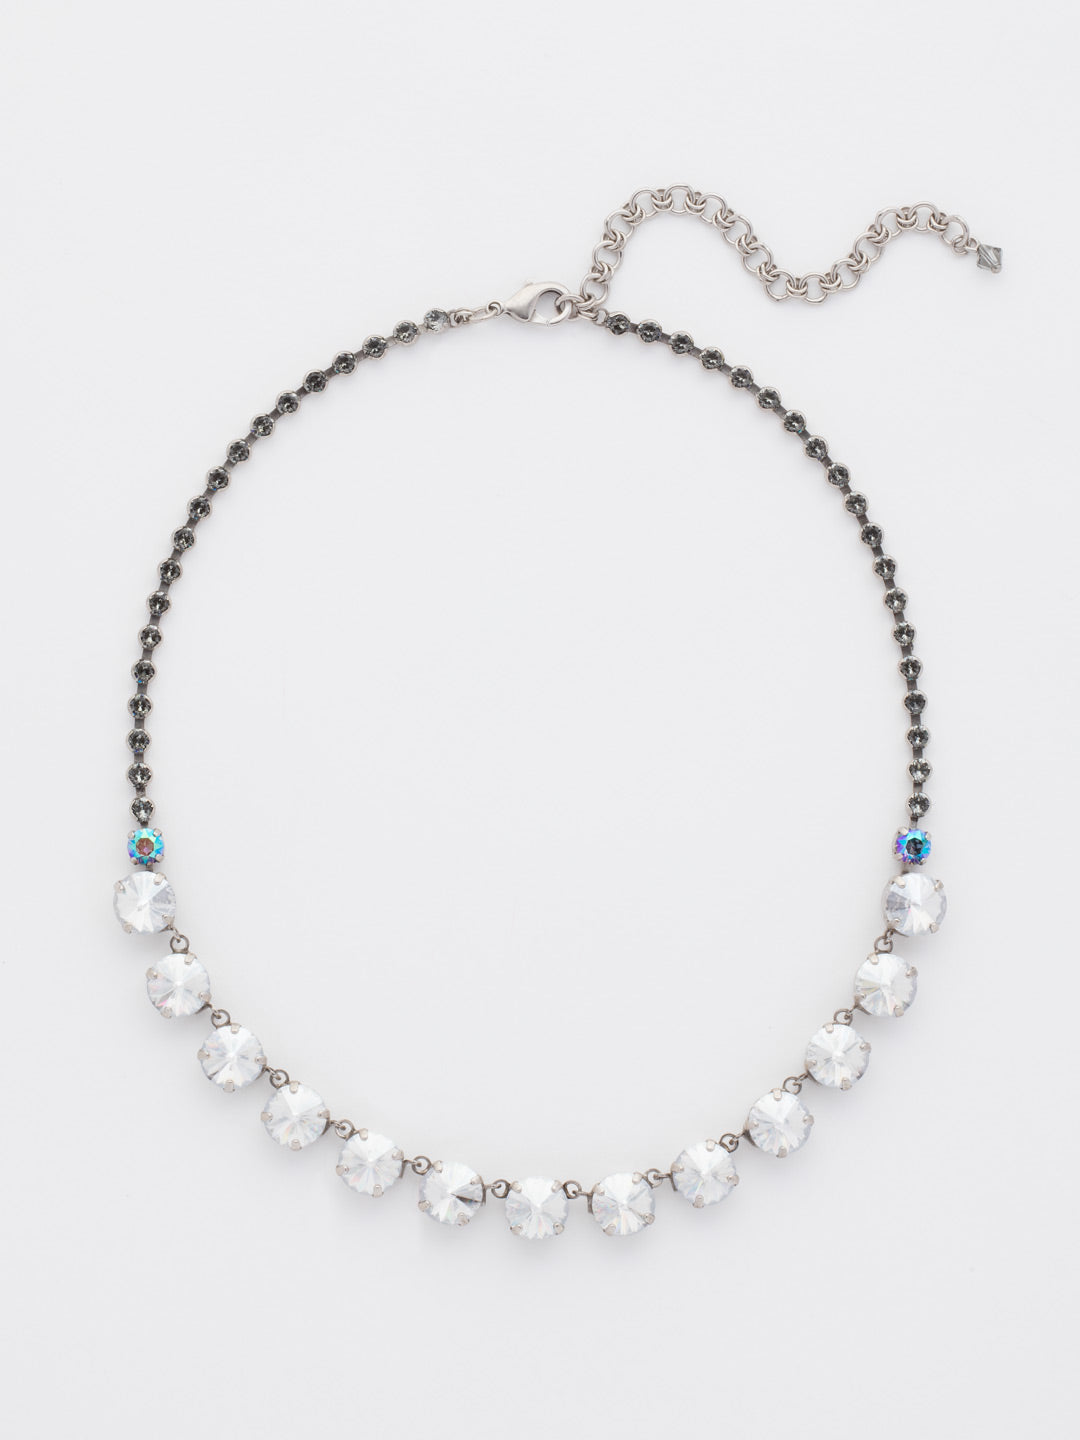 Repeating Rivoli Classic Line Necklace - NCU19ASCRO - A classic beauty! This line necklace boasts a little extra flare with its beautifully faceted rivoli crystals and decorative stone encrusted chain. You're set to sparkle from every angle.